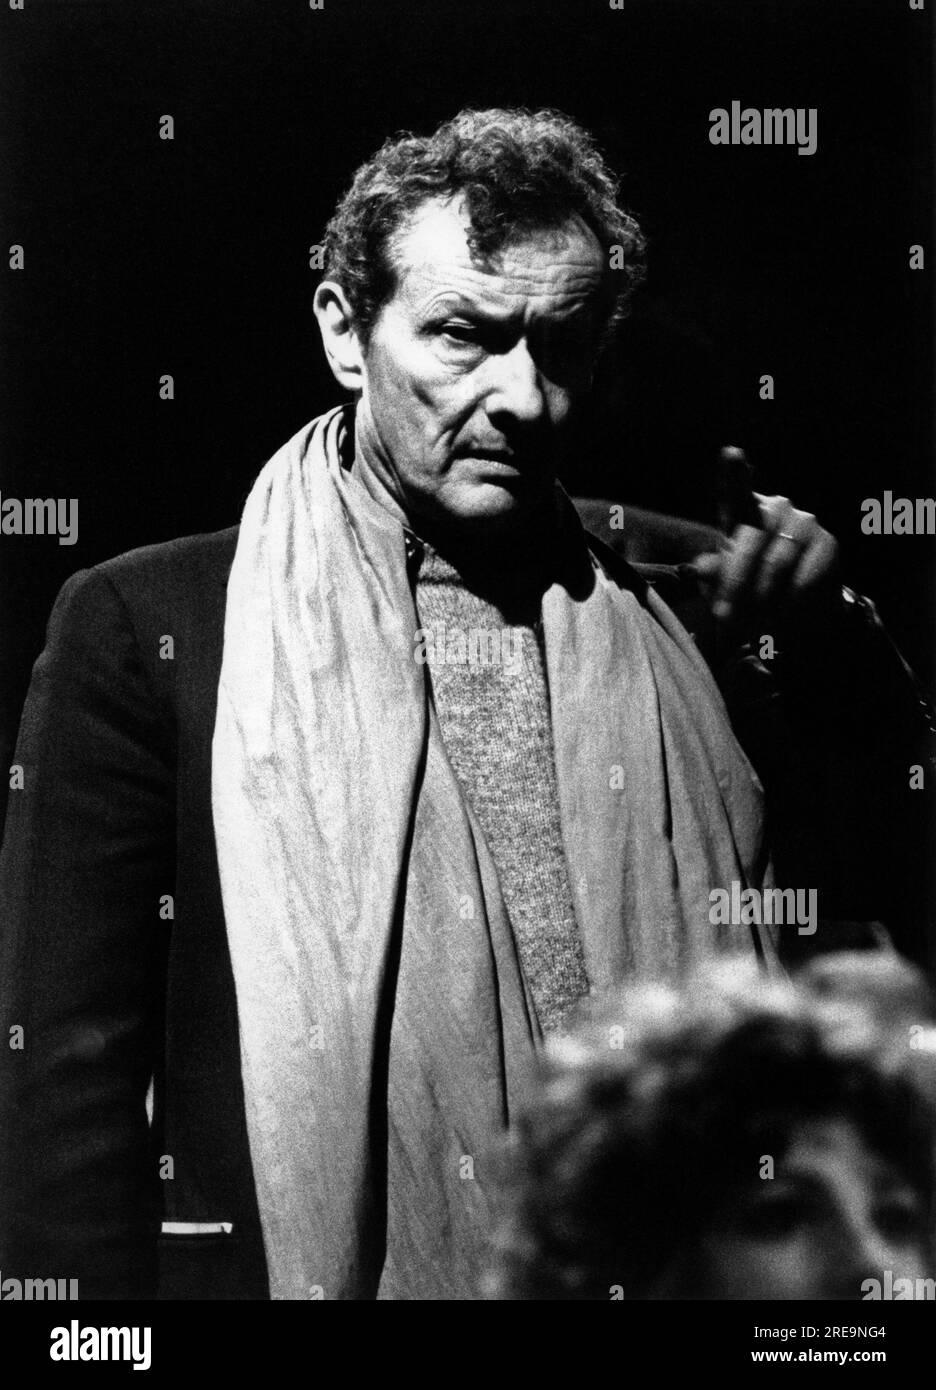 director Jean-Louis Barrault at a dress rehearsal of The Theatre du Soleil production of 1789 by Arianna Mnouchkine at the Round House, London NW1 in 1971 Stock Photo